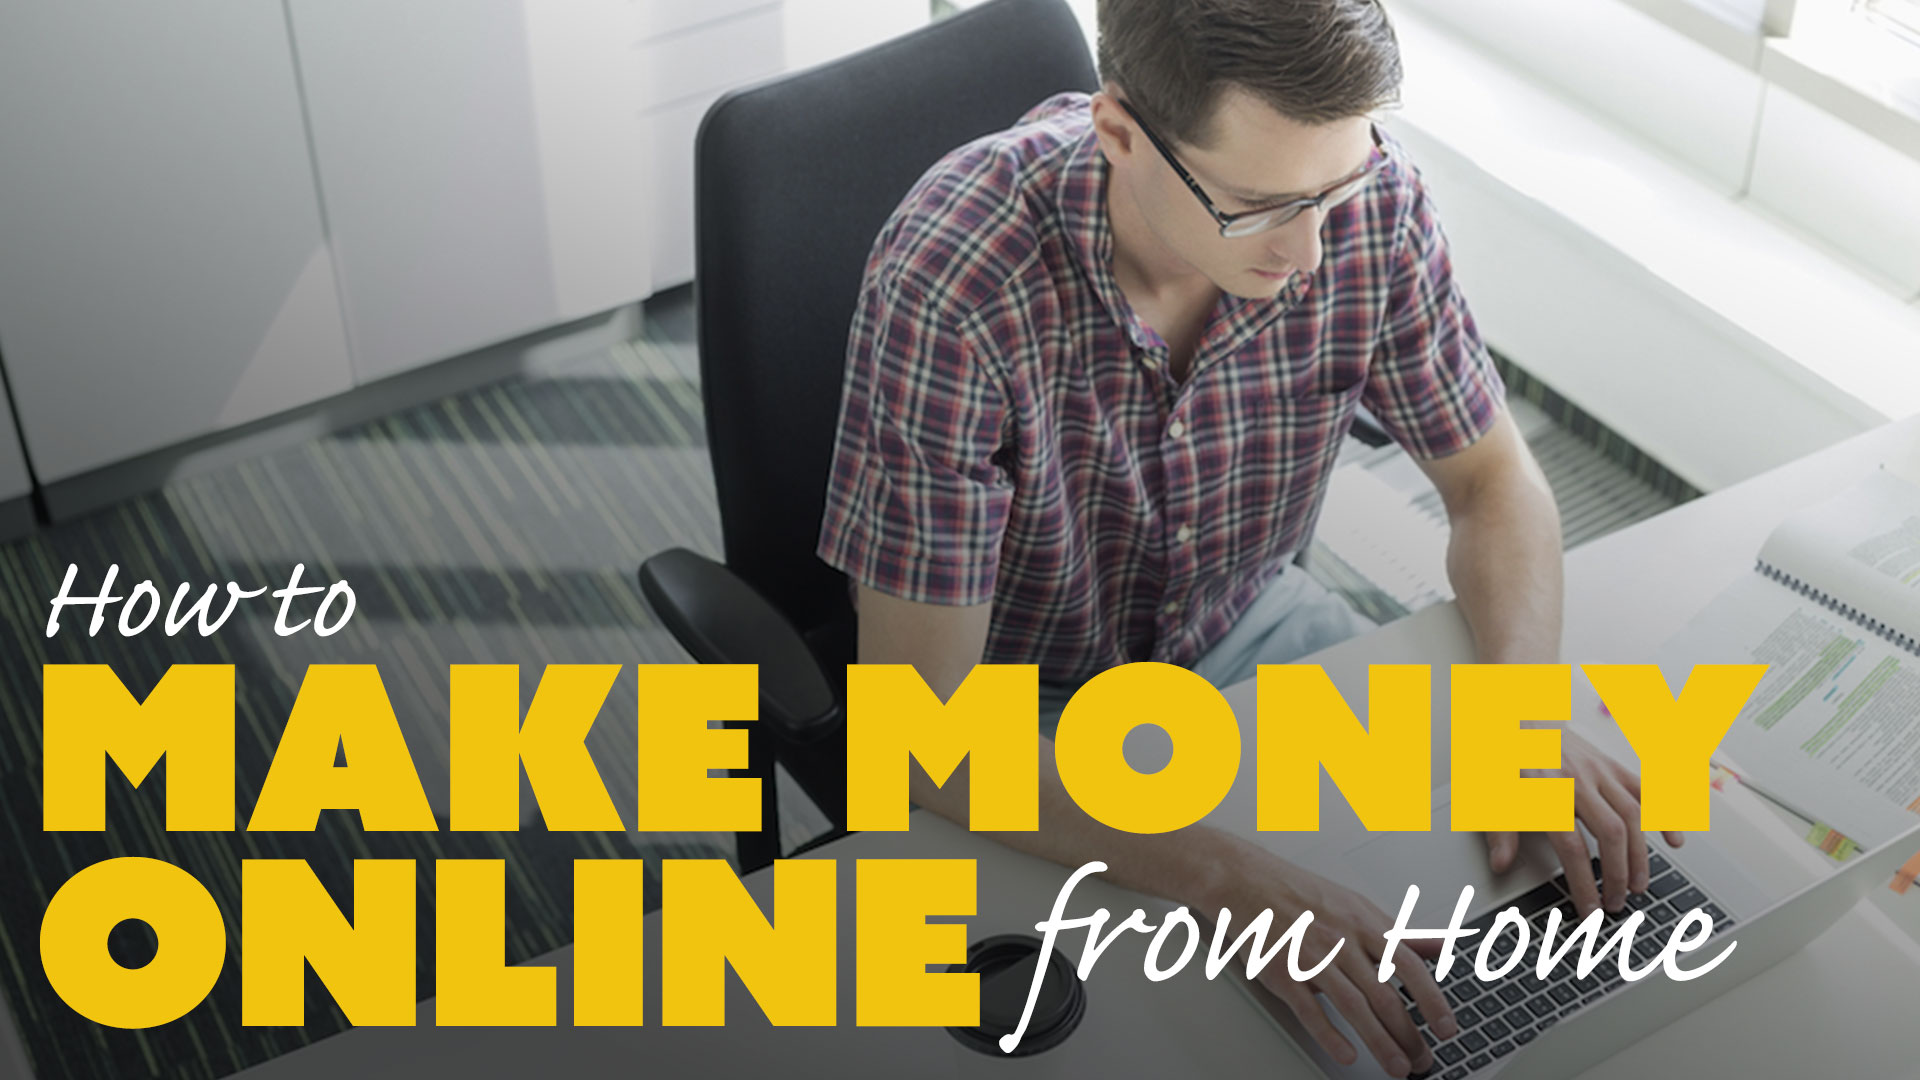 How to Make Money Online at Home